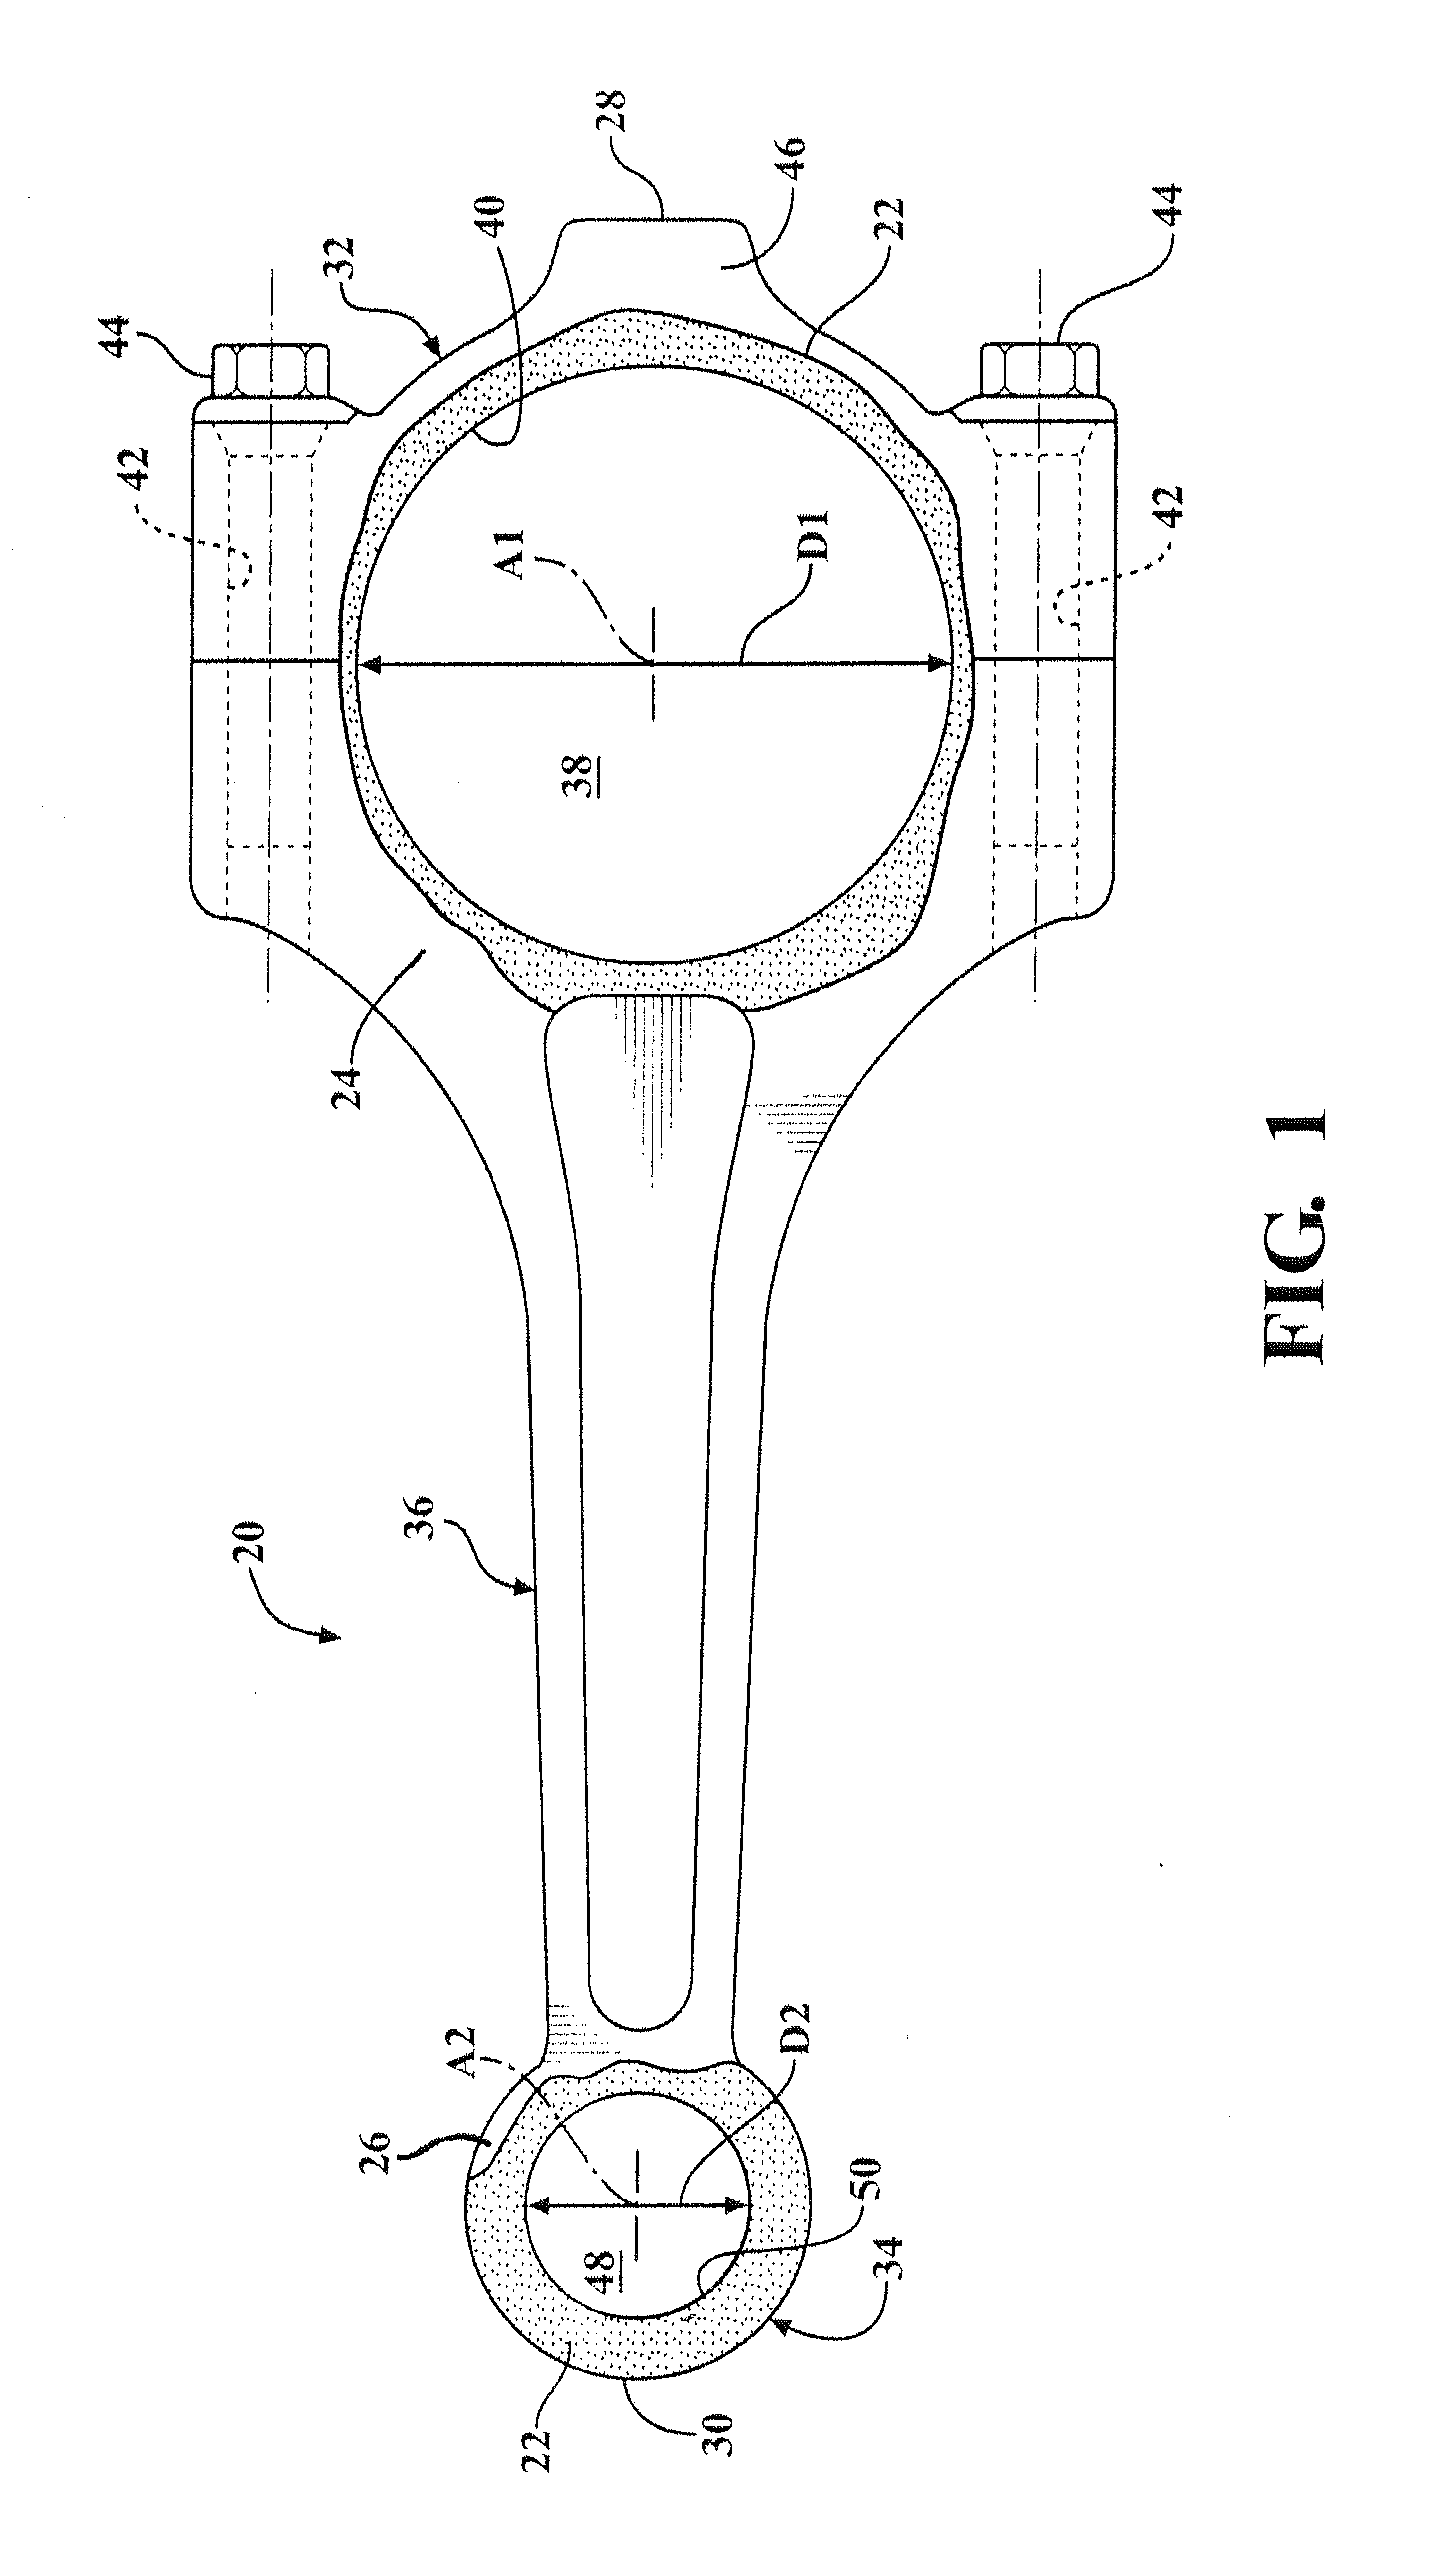 Applying polymer coating connecting rod surfaces for reduced wear